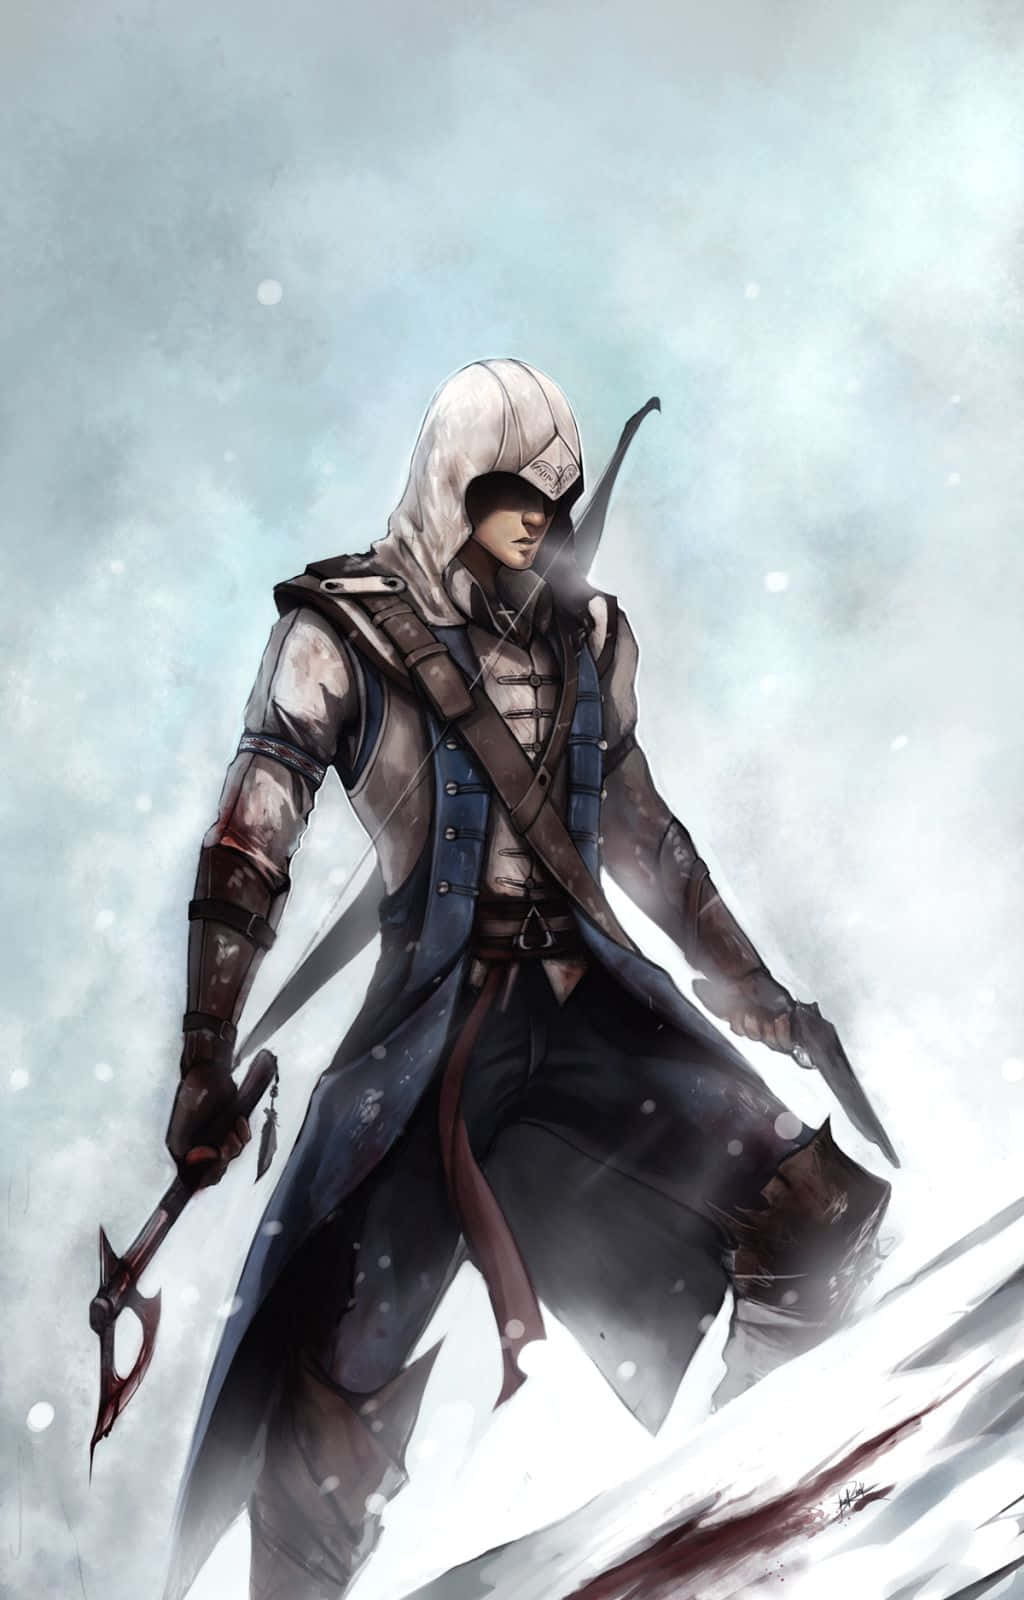 Connor Kenway in Action - Assassin's Creed III Wallpaper Wallpaper